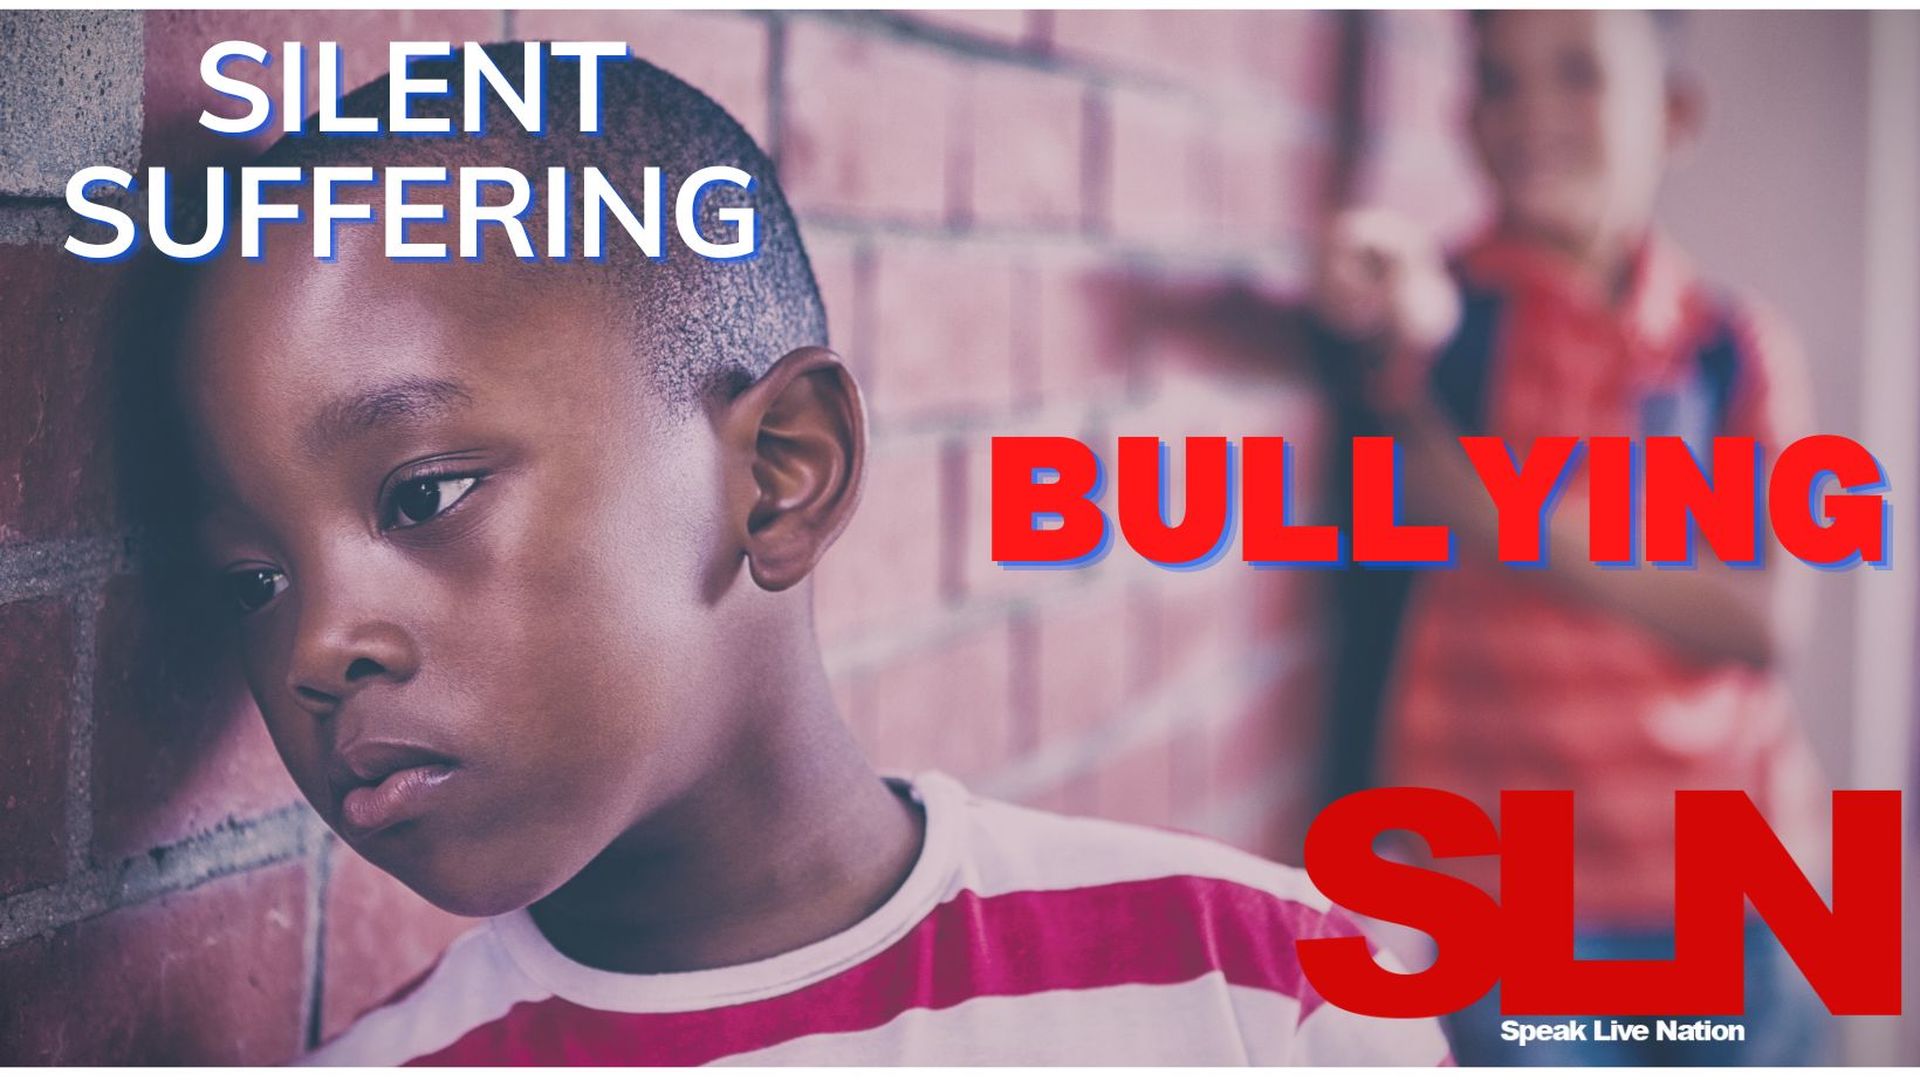 SHOCKING FACTS ABOUT BULLYING PART 1